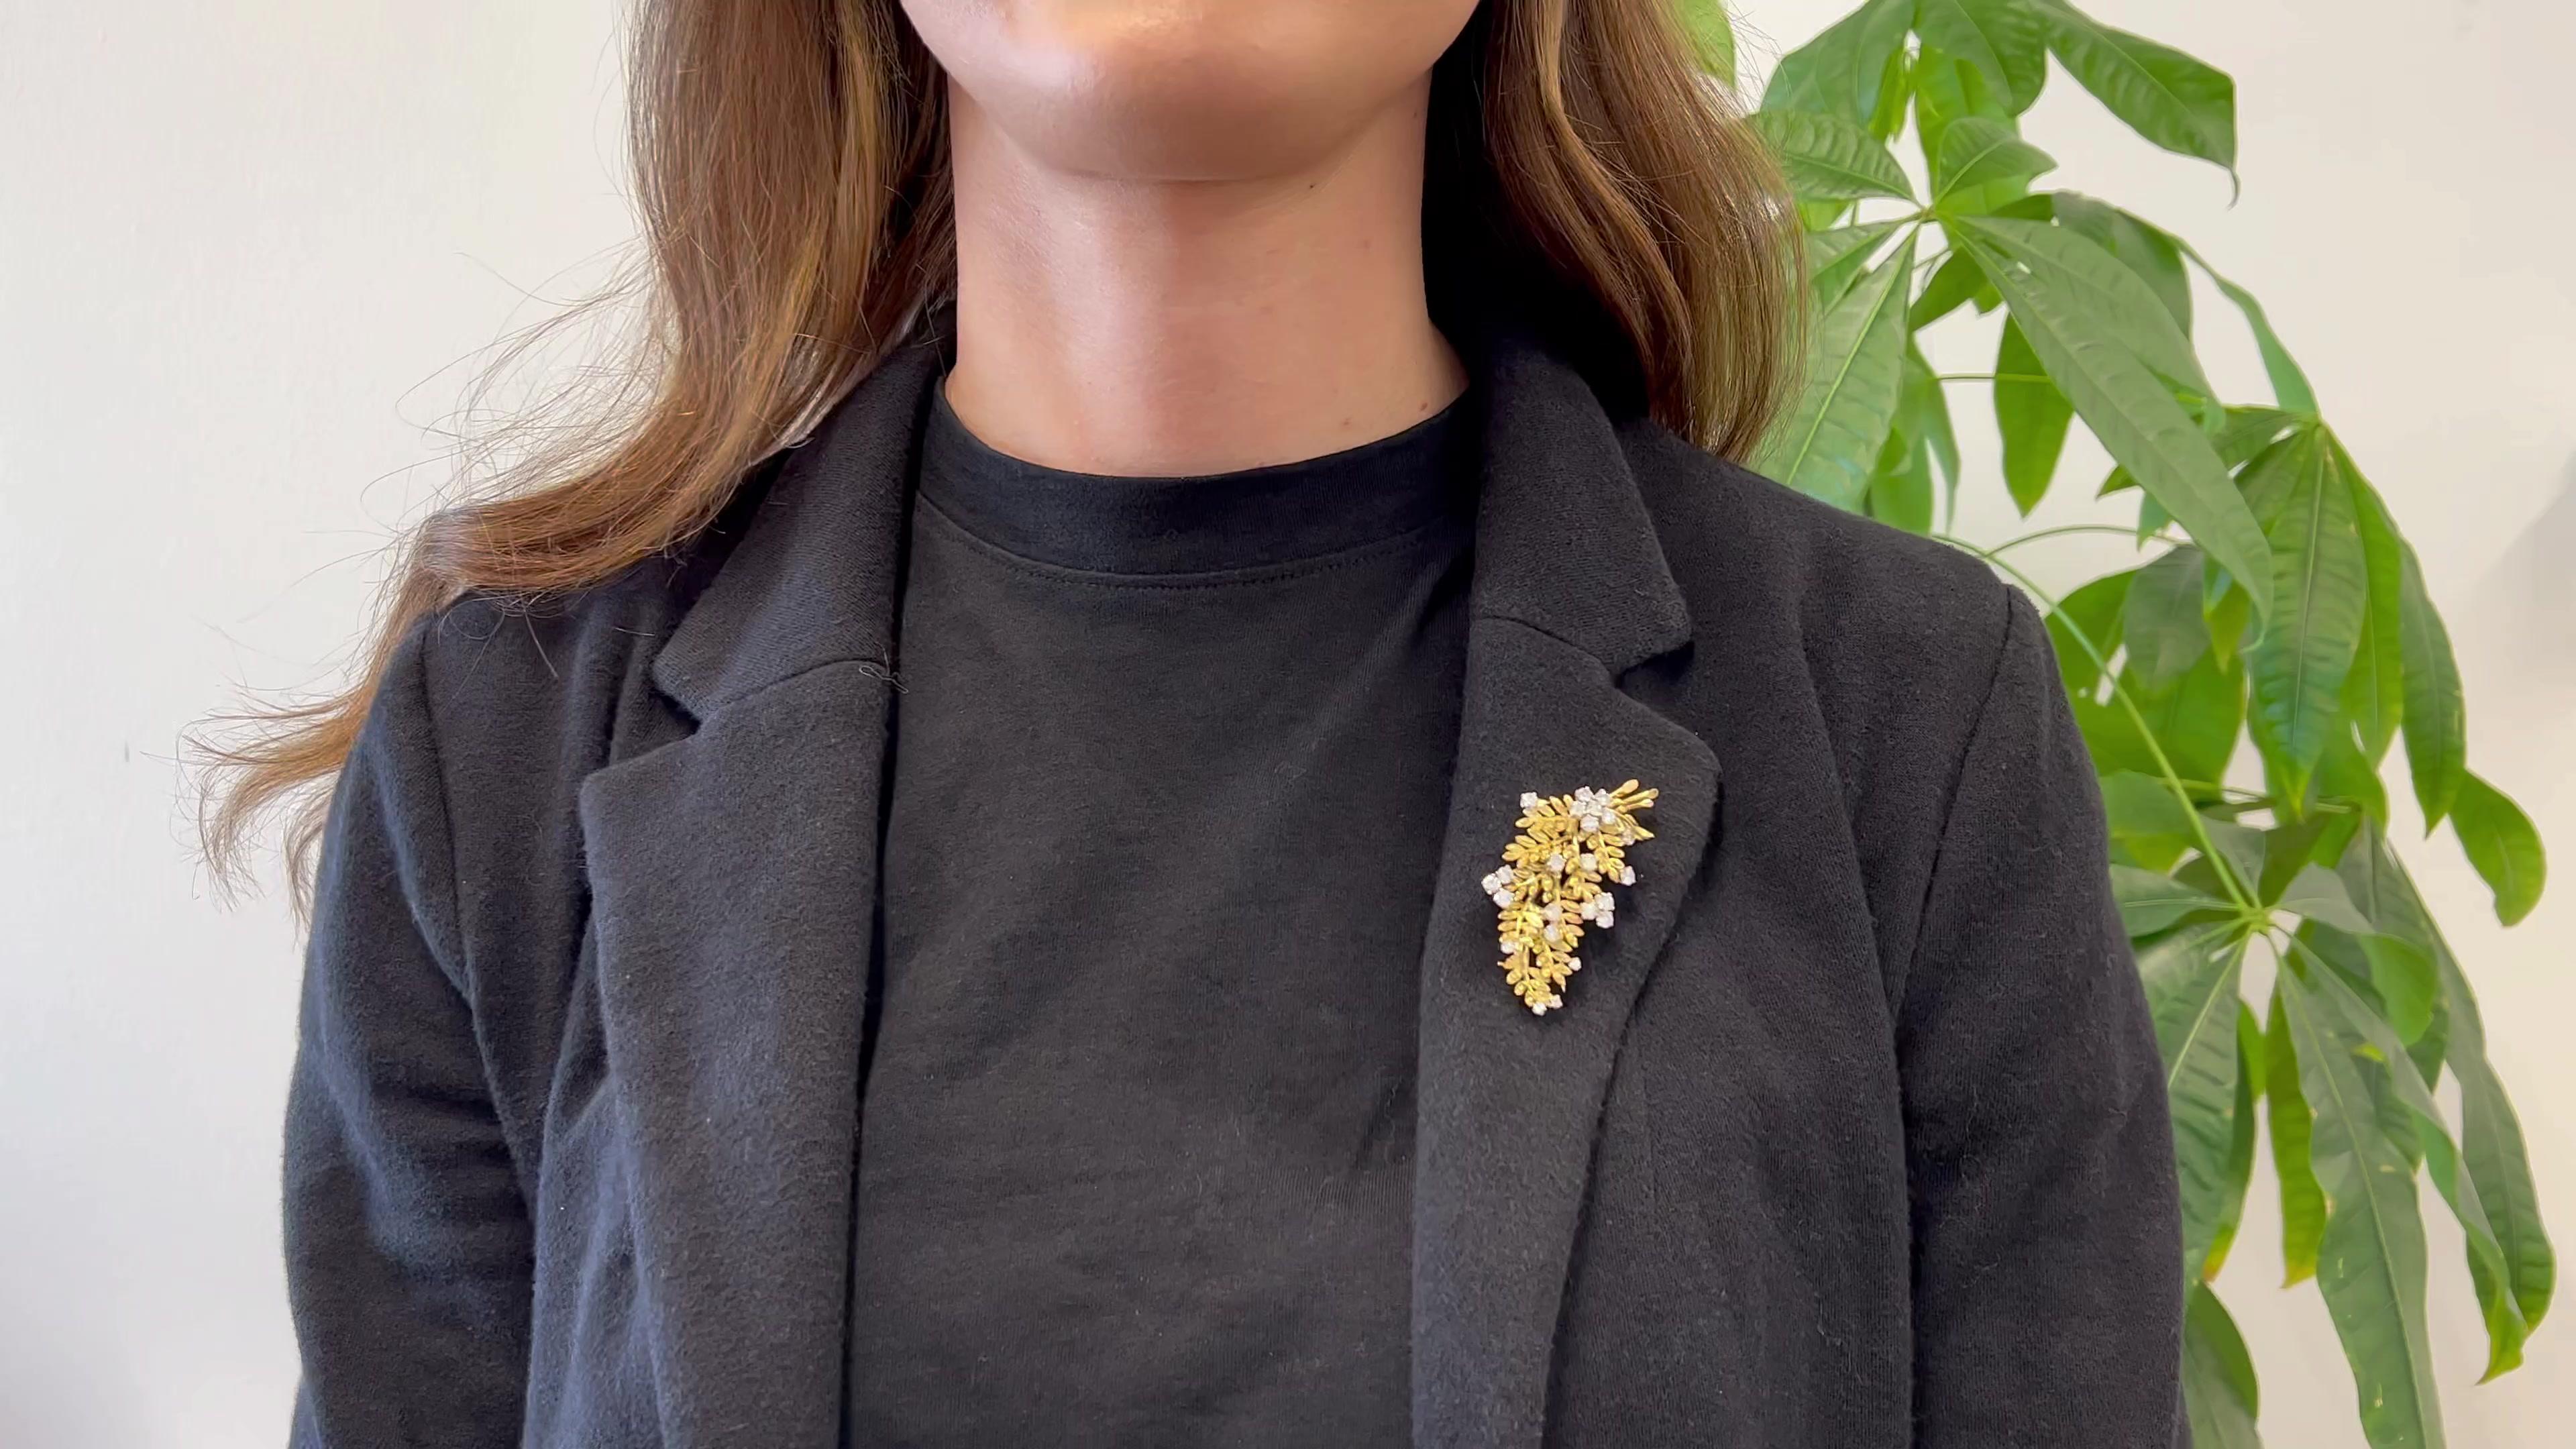 One Mid Century Raymond C. Yard Diamond 18k Yellow Gold Fern Brooch. Featuring 23 round brilliant cut diamonds with a total weight of approximately 3.00 carats, graded E-F color, VVS-VS clarity. Crafted in 18 karat yellow gold with diamonds set in